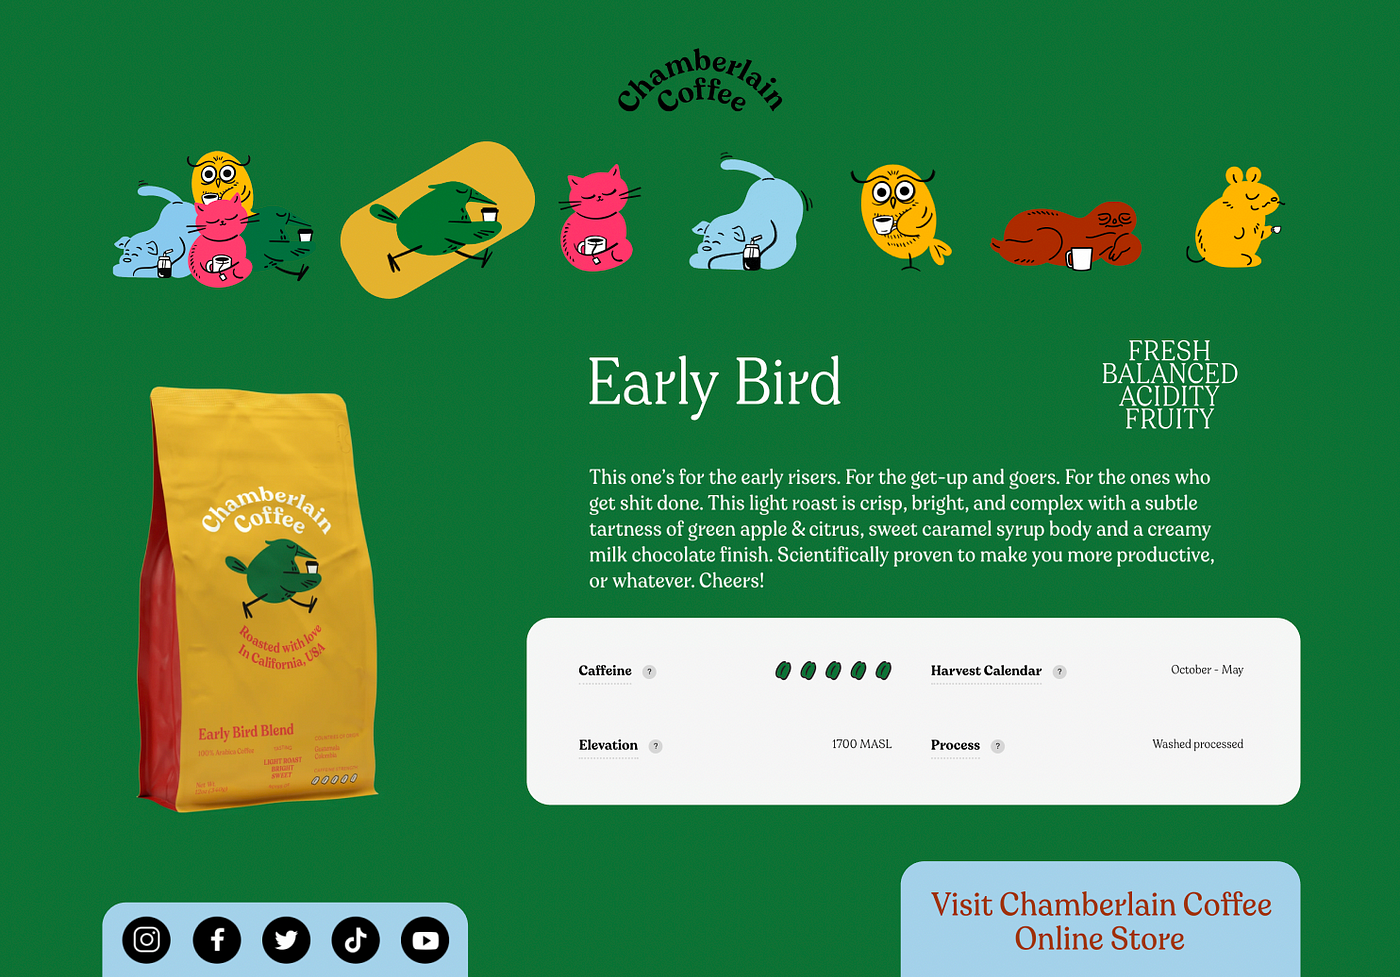 Chamberlain Coffee: Is Their Website As Easy To Use As Their